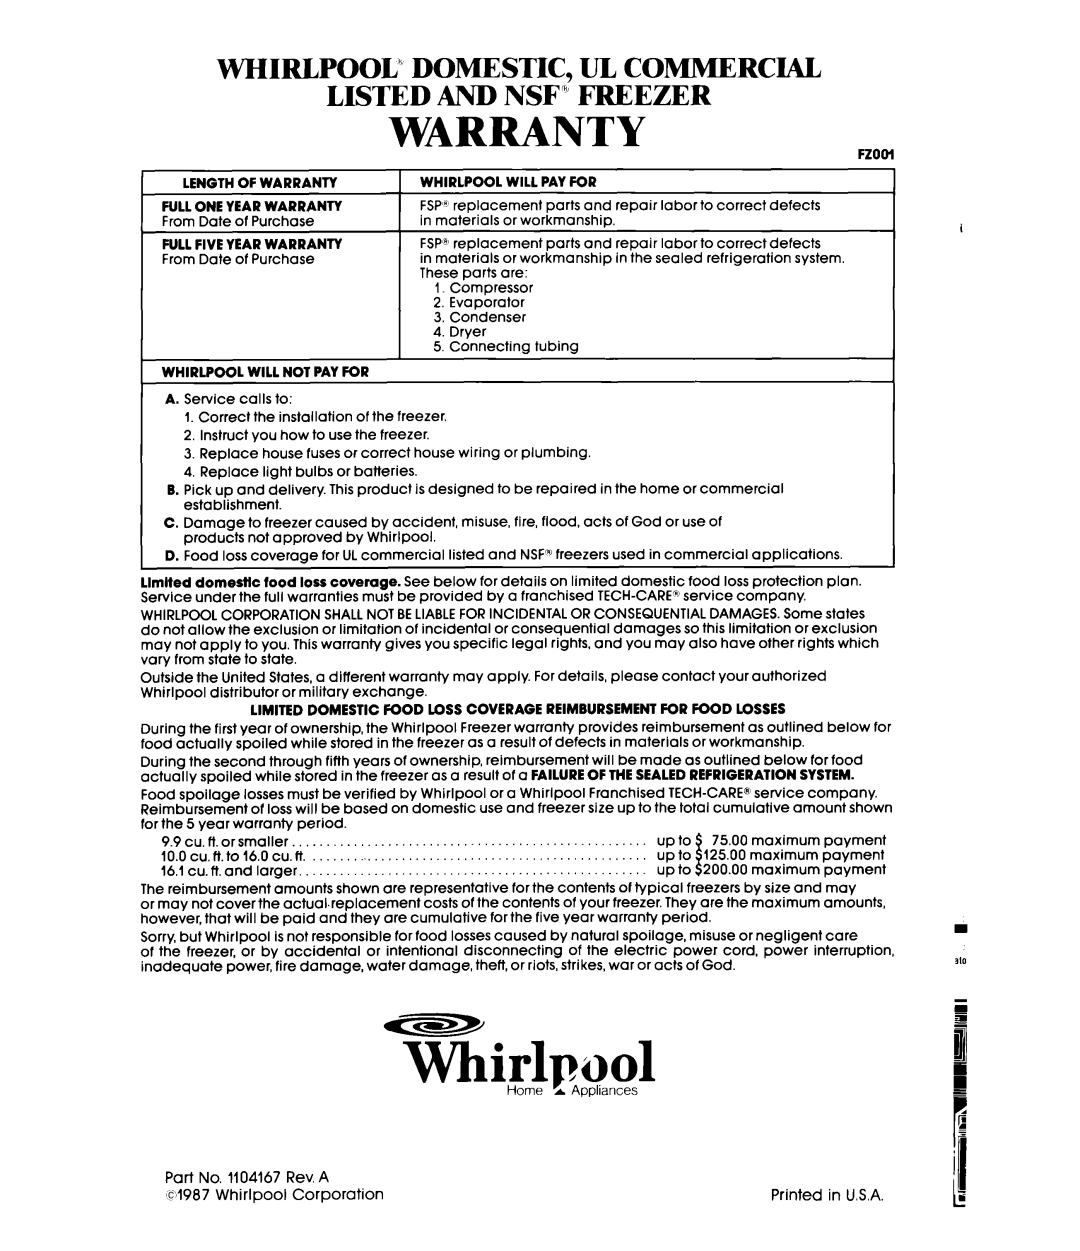 Whirlpool EV150L manual ~irlpool, Warranty, Whirlpool’” Domestic, Ul Commercial, Listed And Nsf” Freezer 